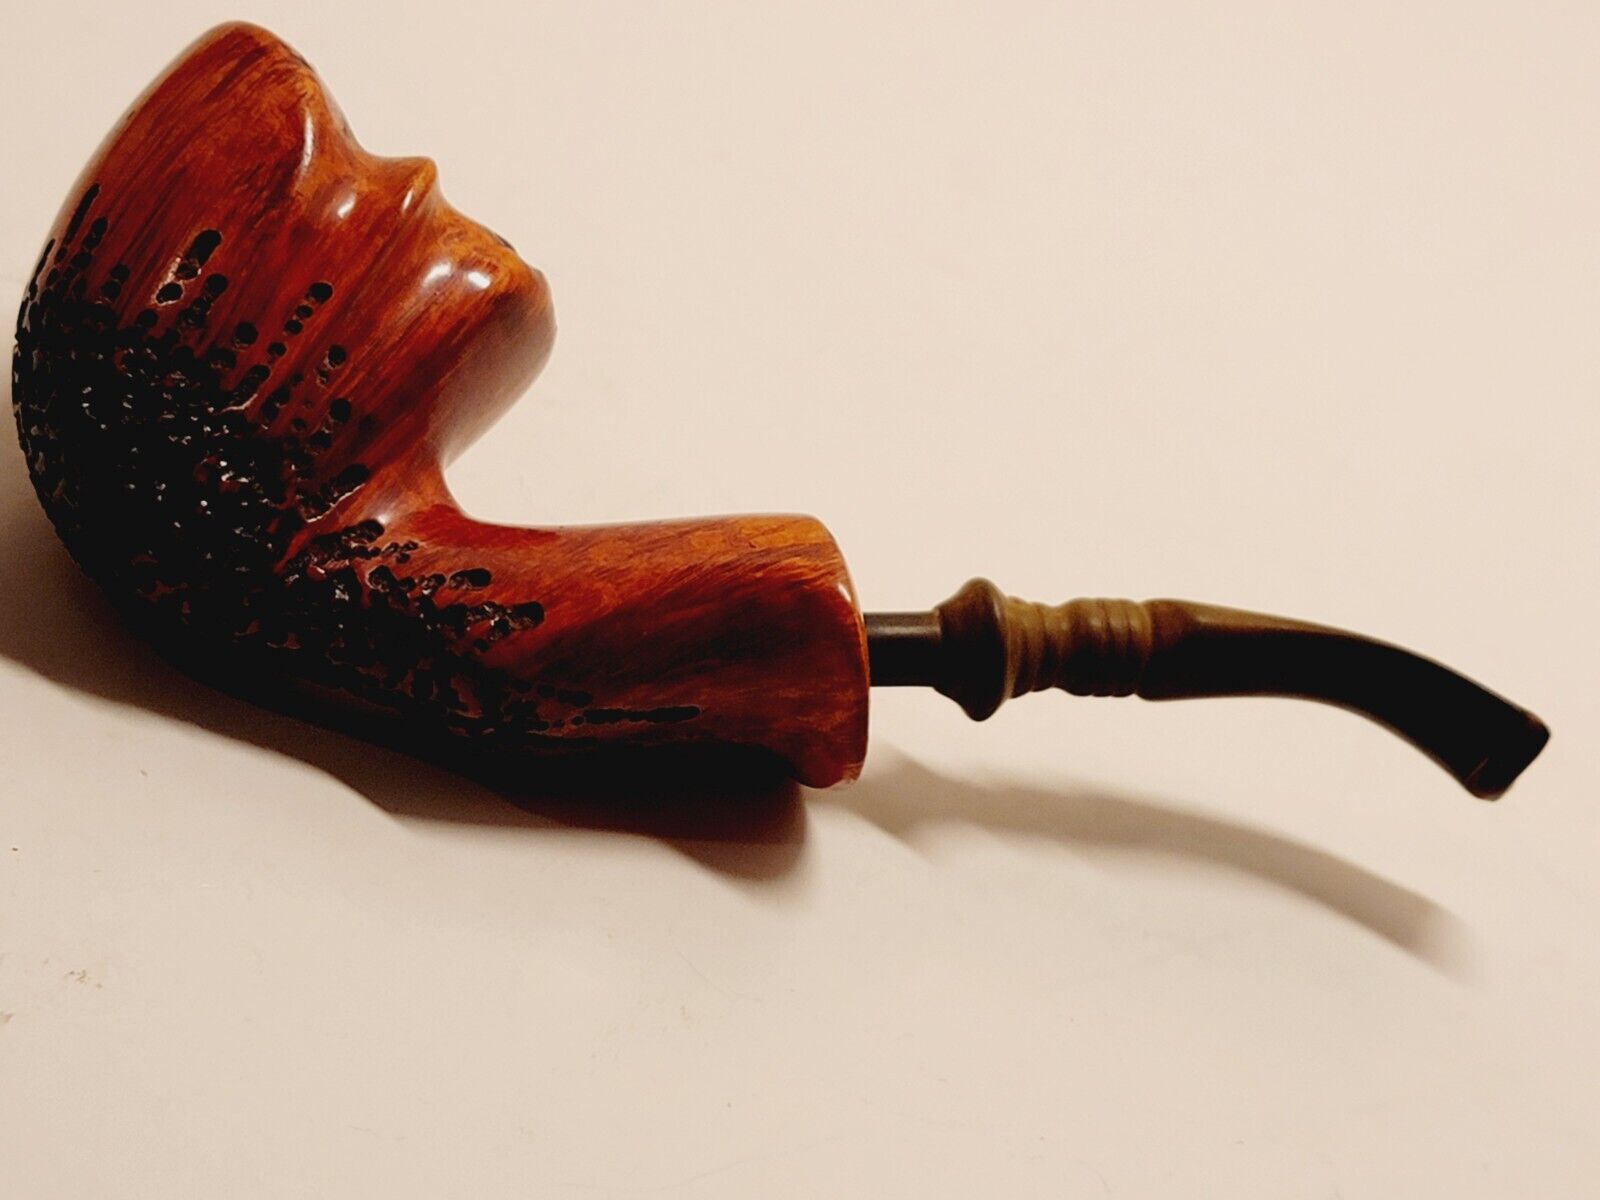 Vntg Nording Tobacco Pipe 4 Made In Denmark Sm Crack And Blemish On End Of Shank